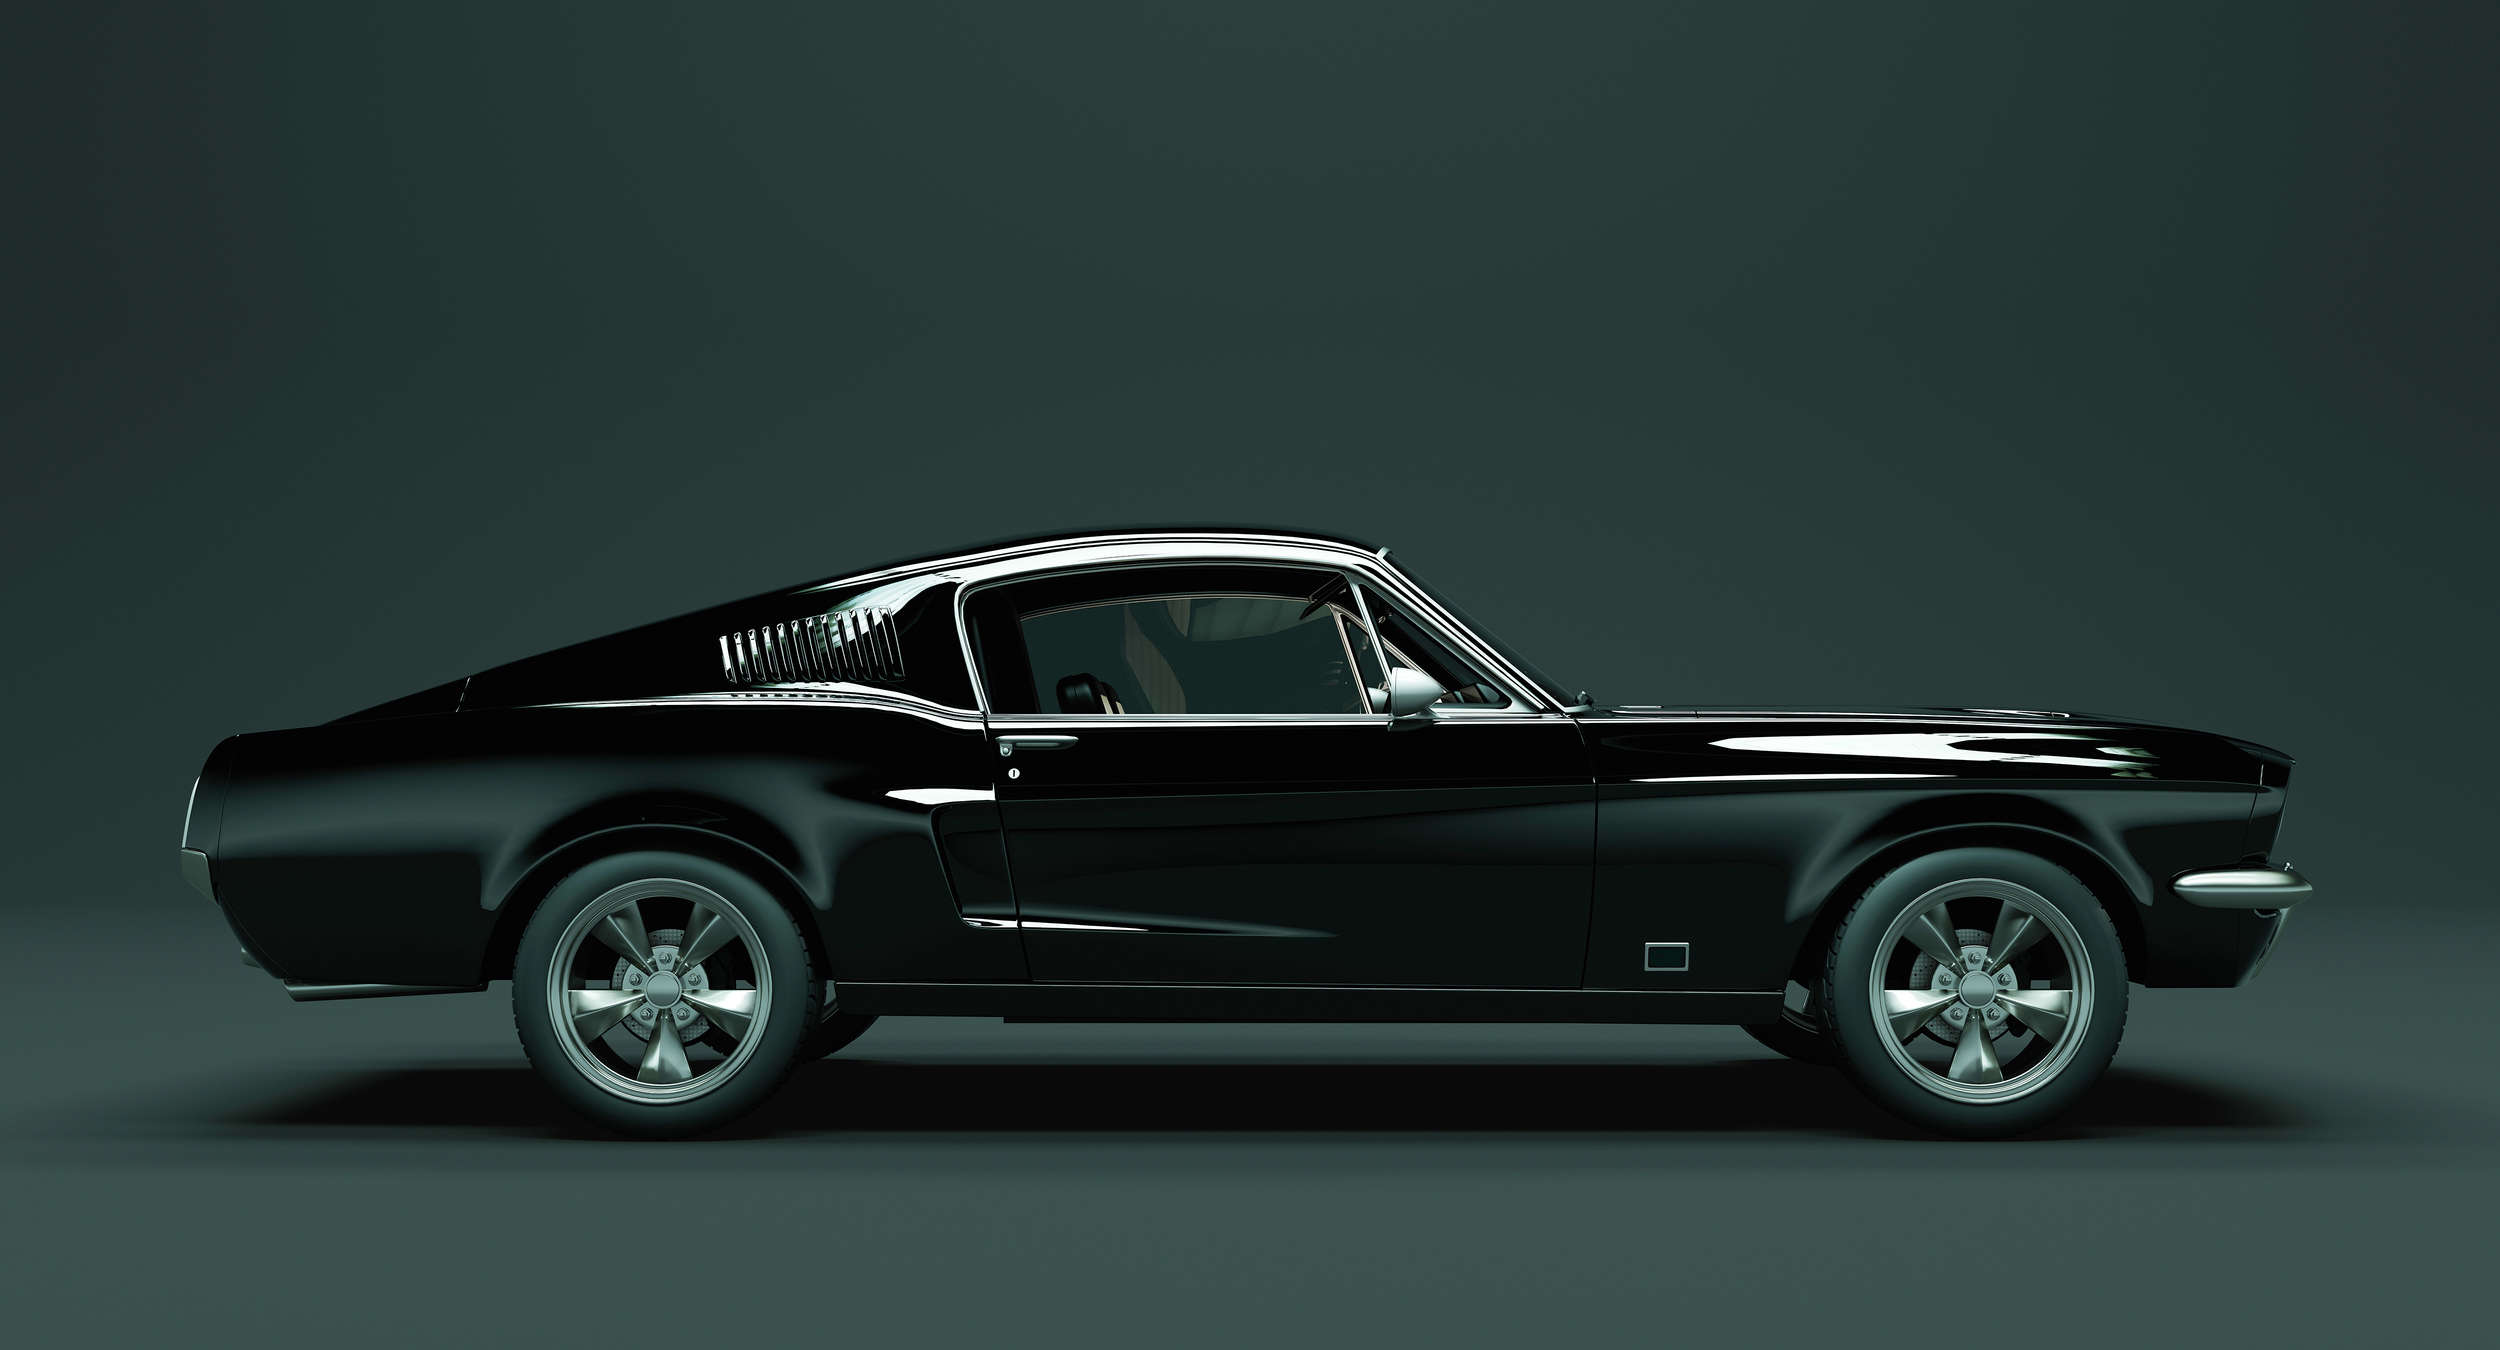             Mustang 1 - Photo wallpaper, side view Mustang, vintage - blue, black | structure non-woven
        